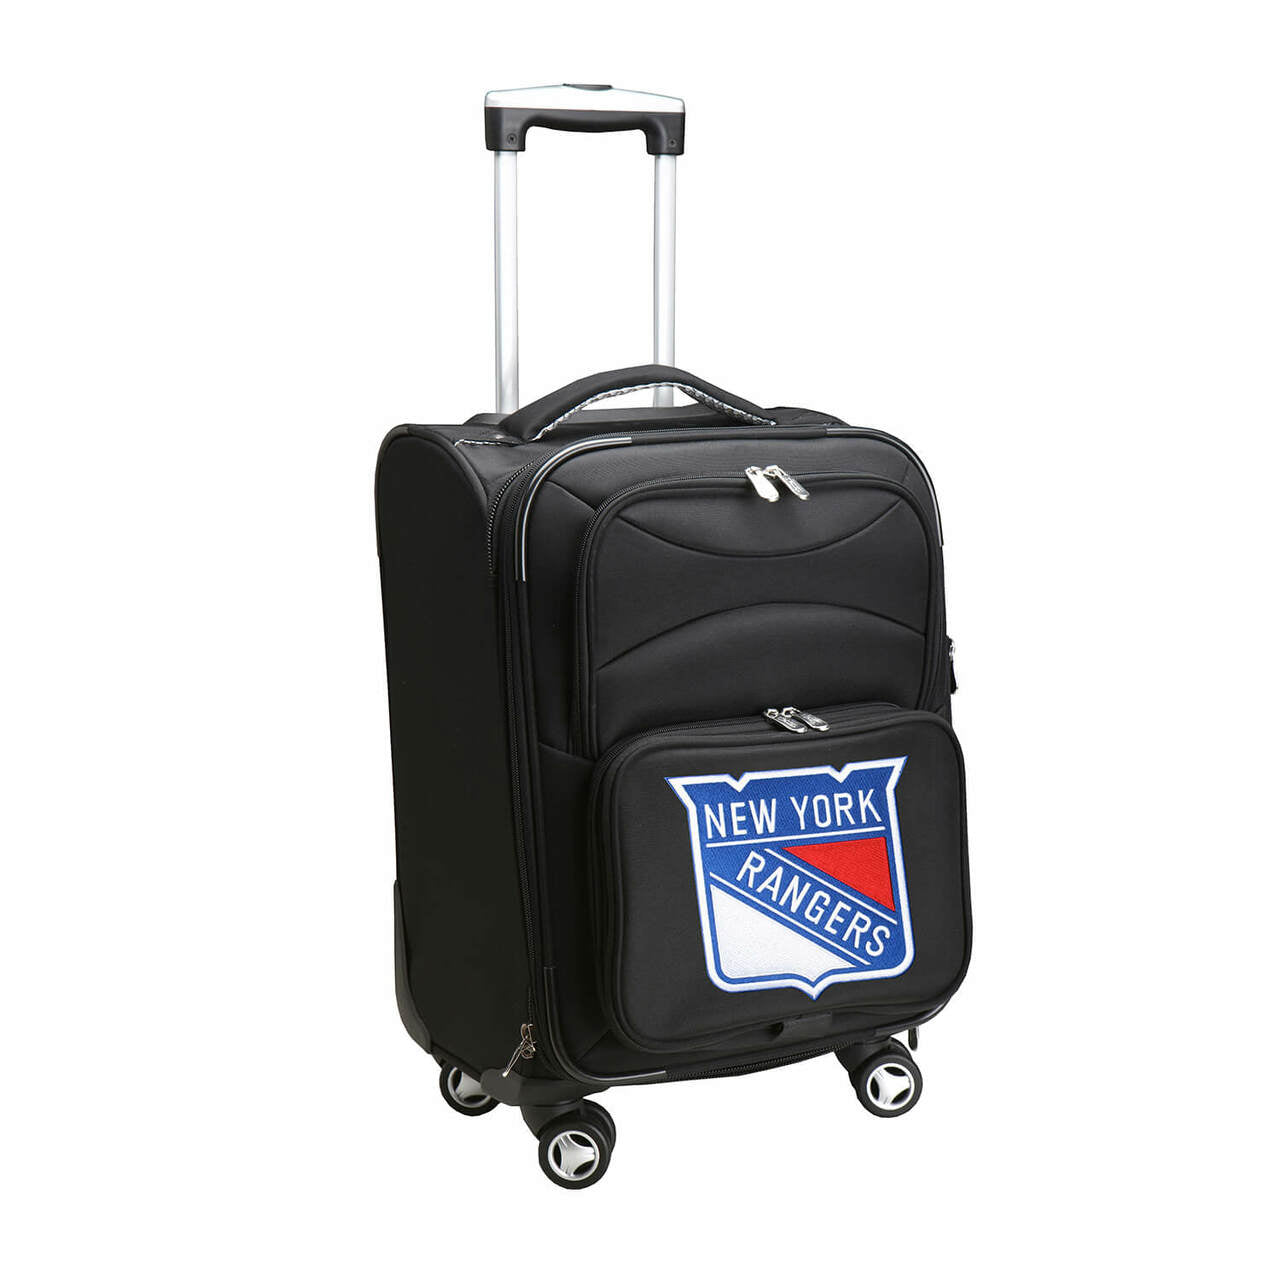 Rangers Luggage | New York Rangers 20" Carry-on Spinner Luggage